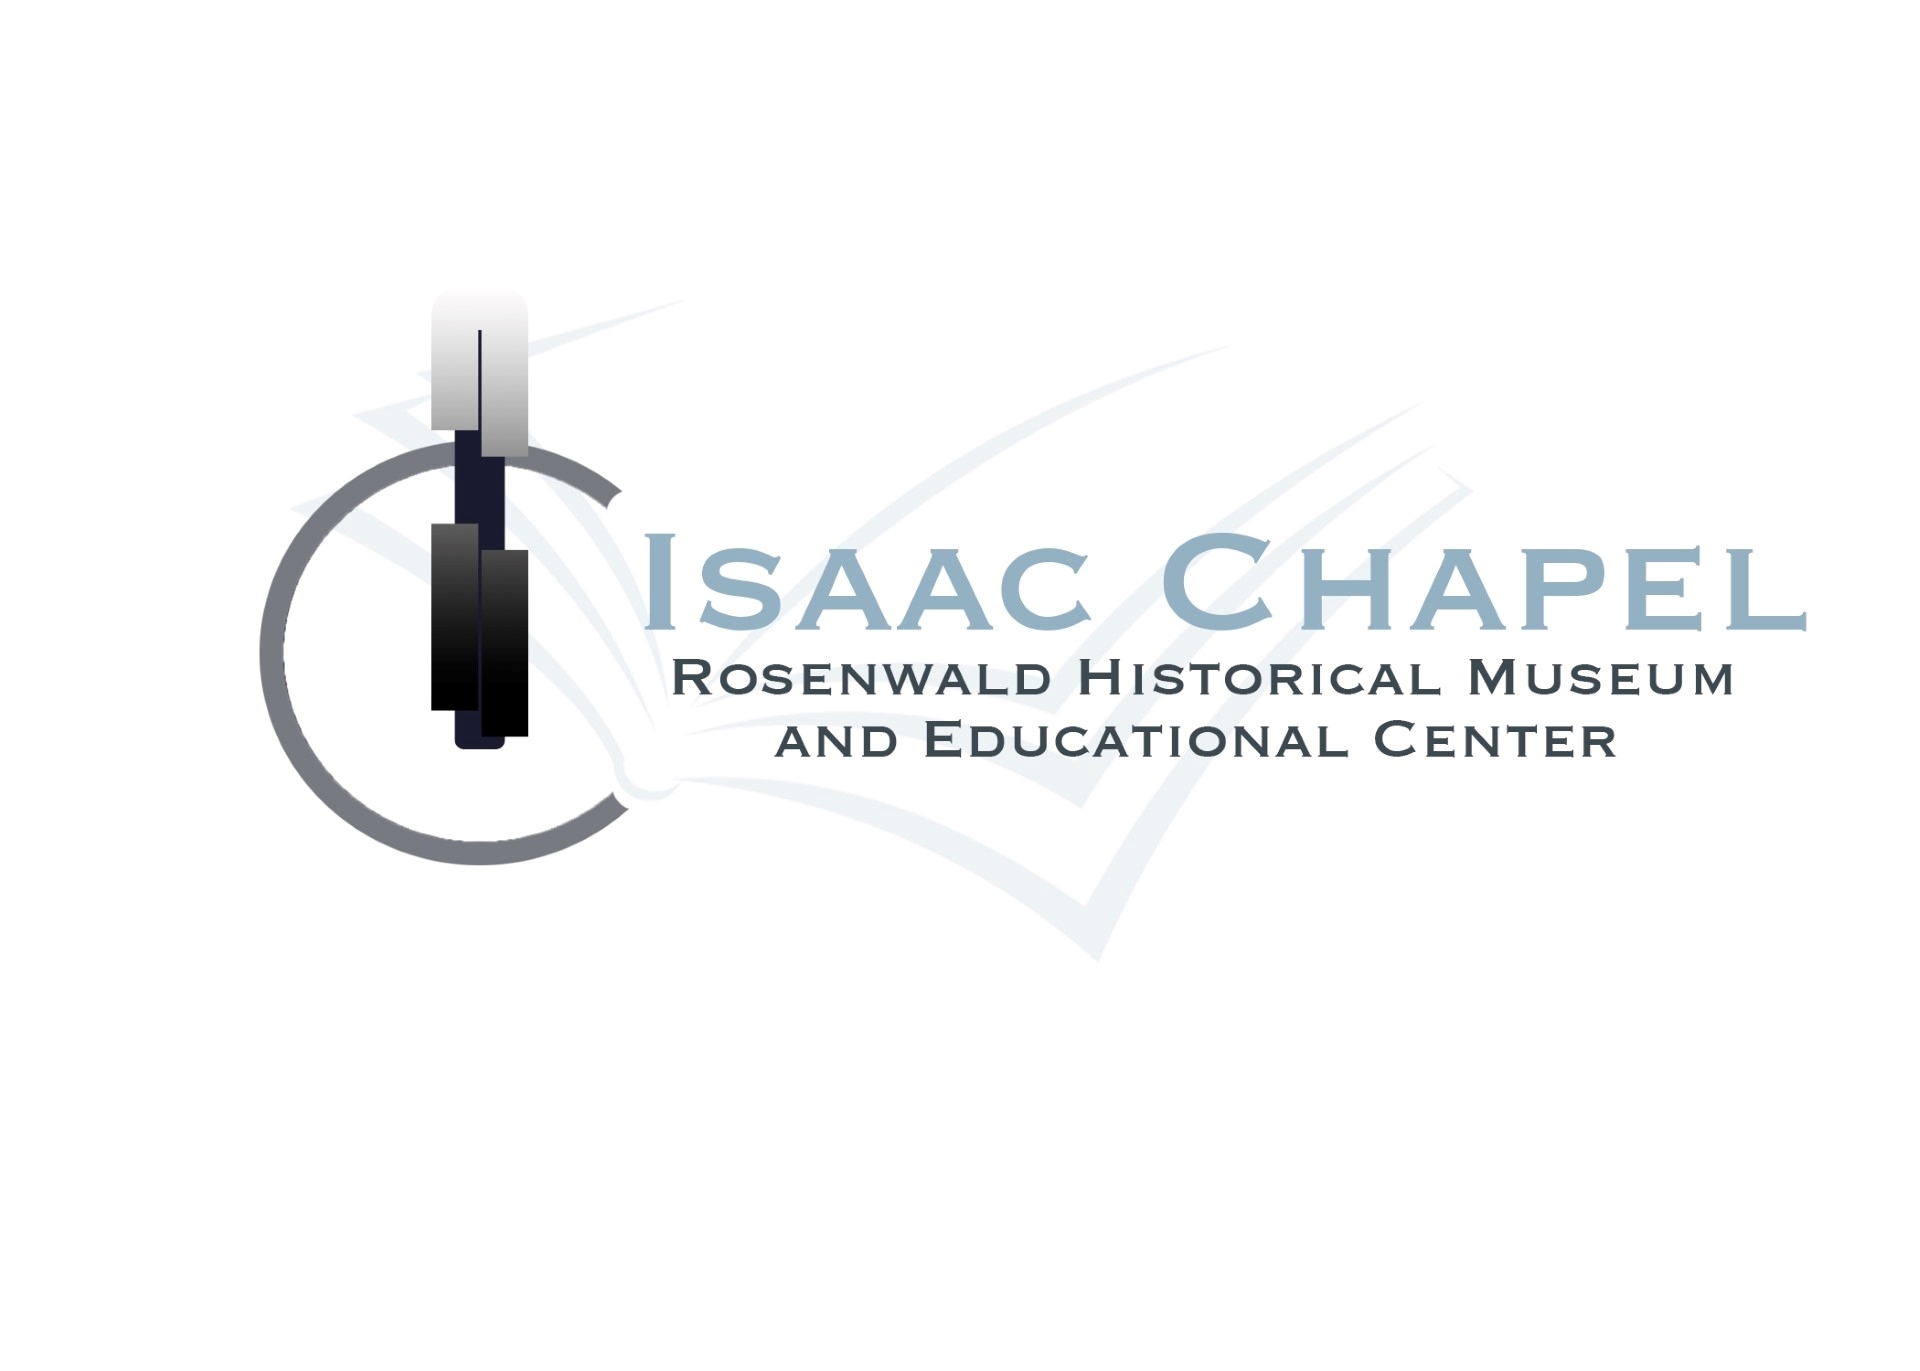 Isaac Chapel Rosenwald Historical Museum and Educational Center